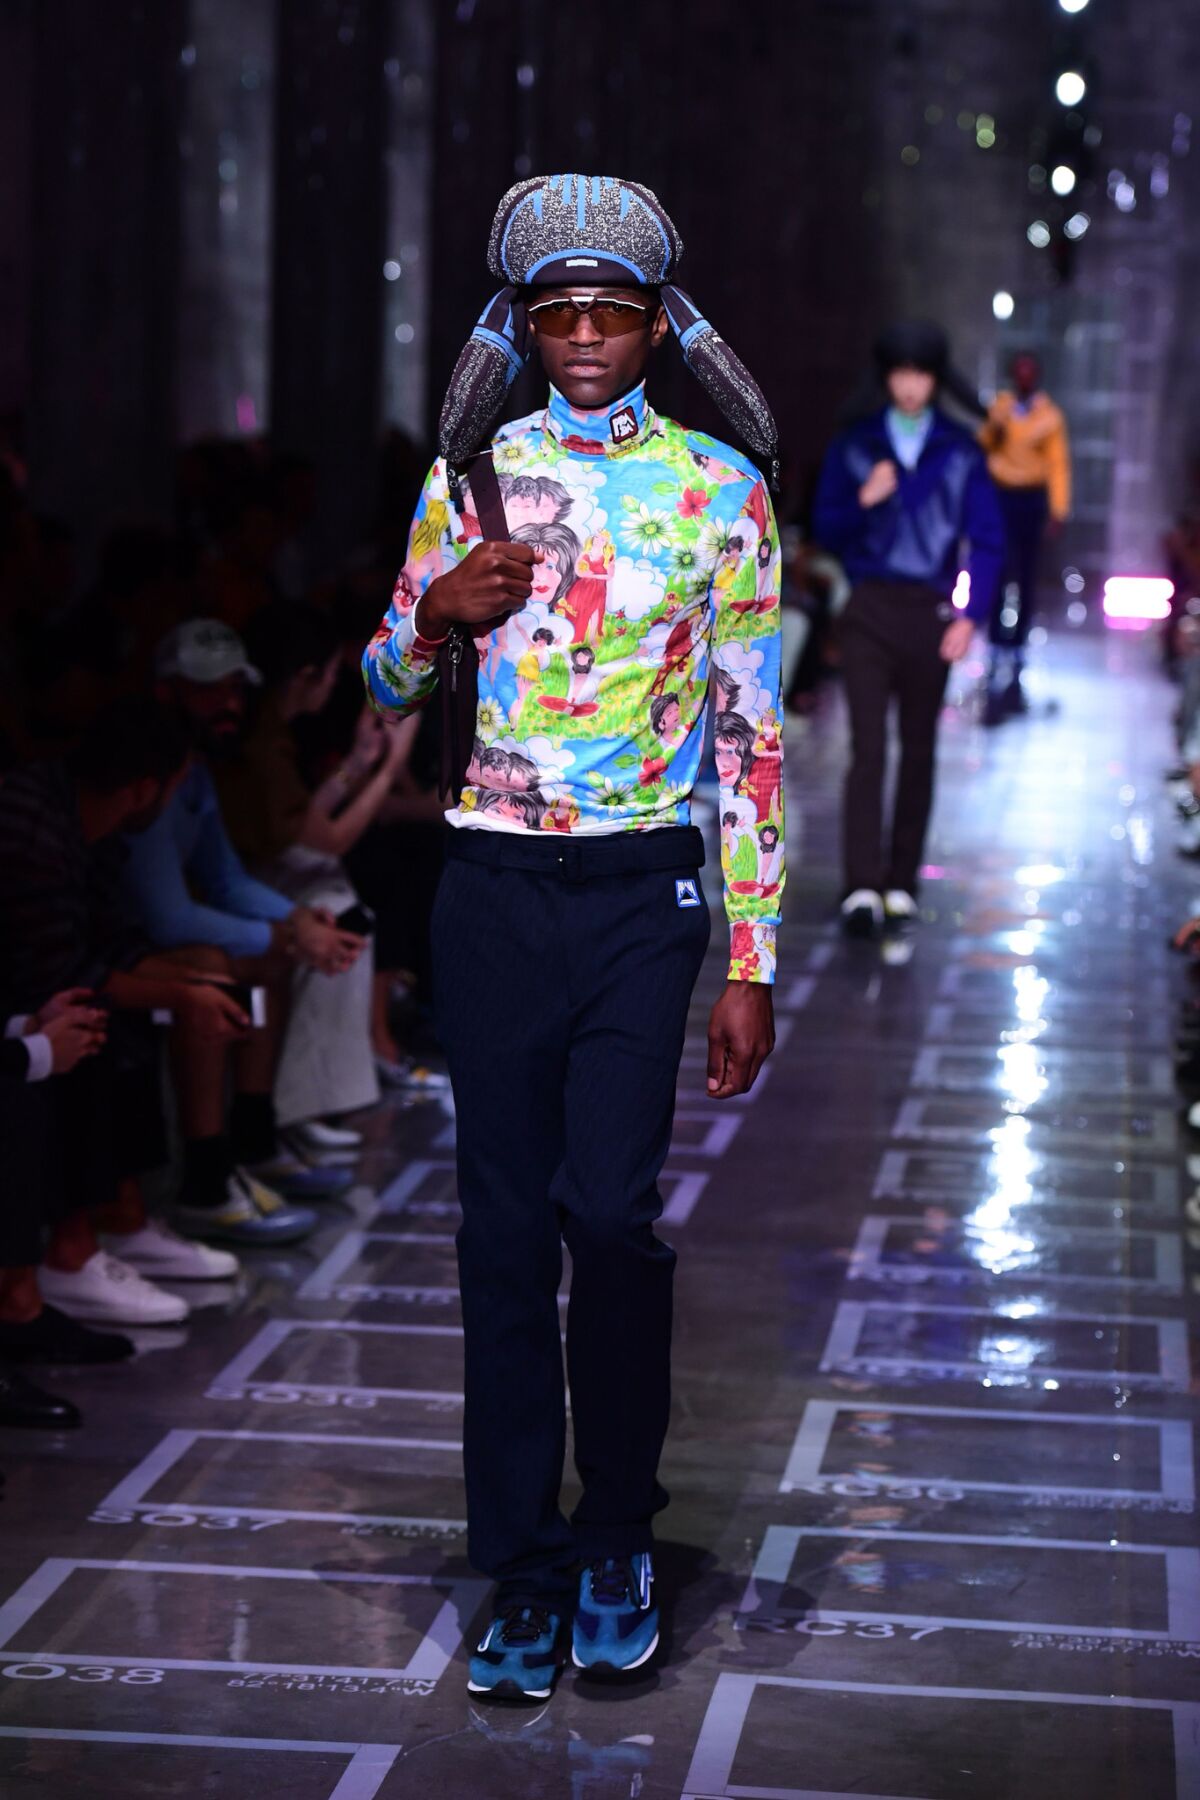 A shirt with a psychedelic print from Prada shown during its men and women's spring/summer 2019 fashion show in Milan on June 17, 2018.